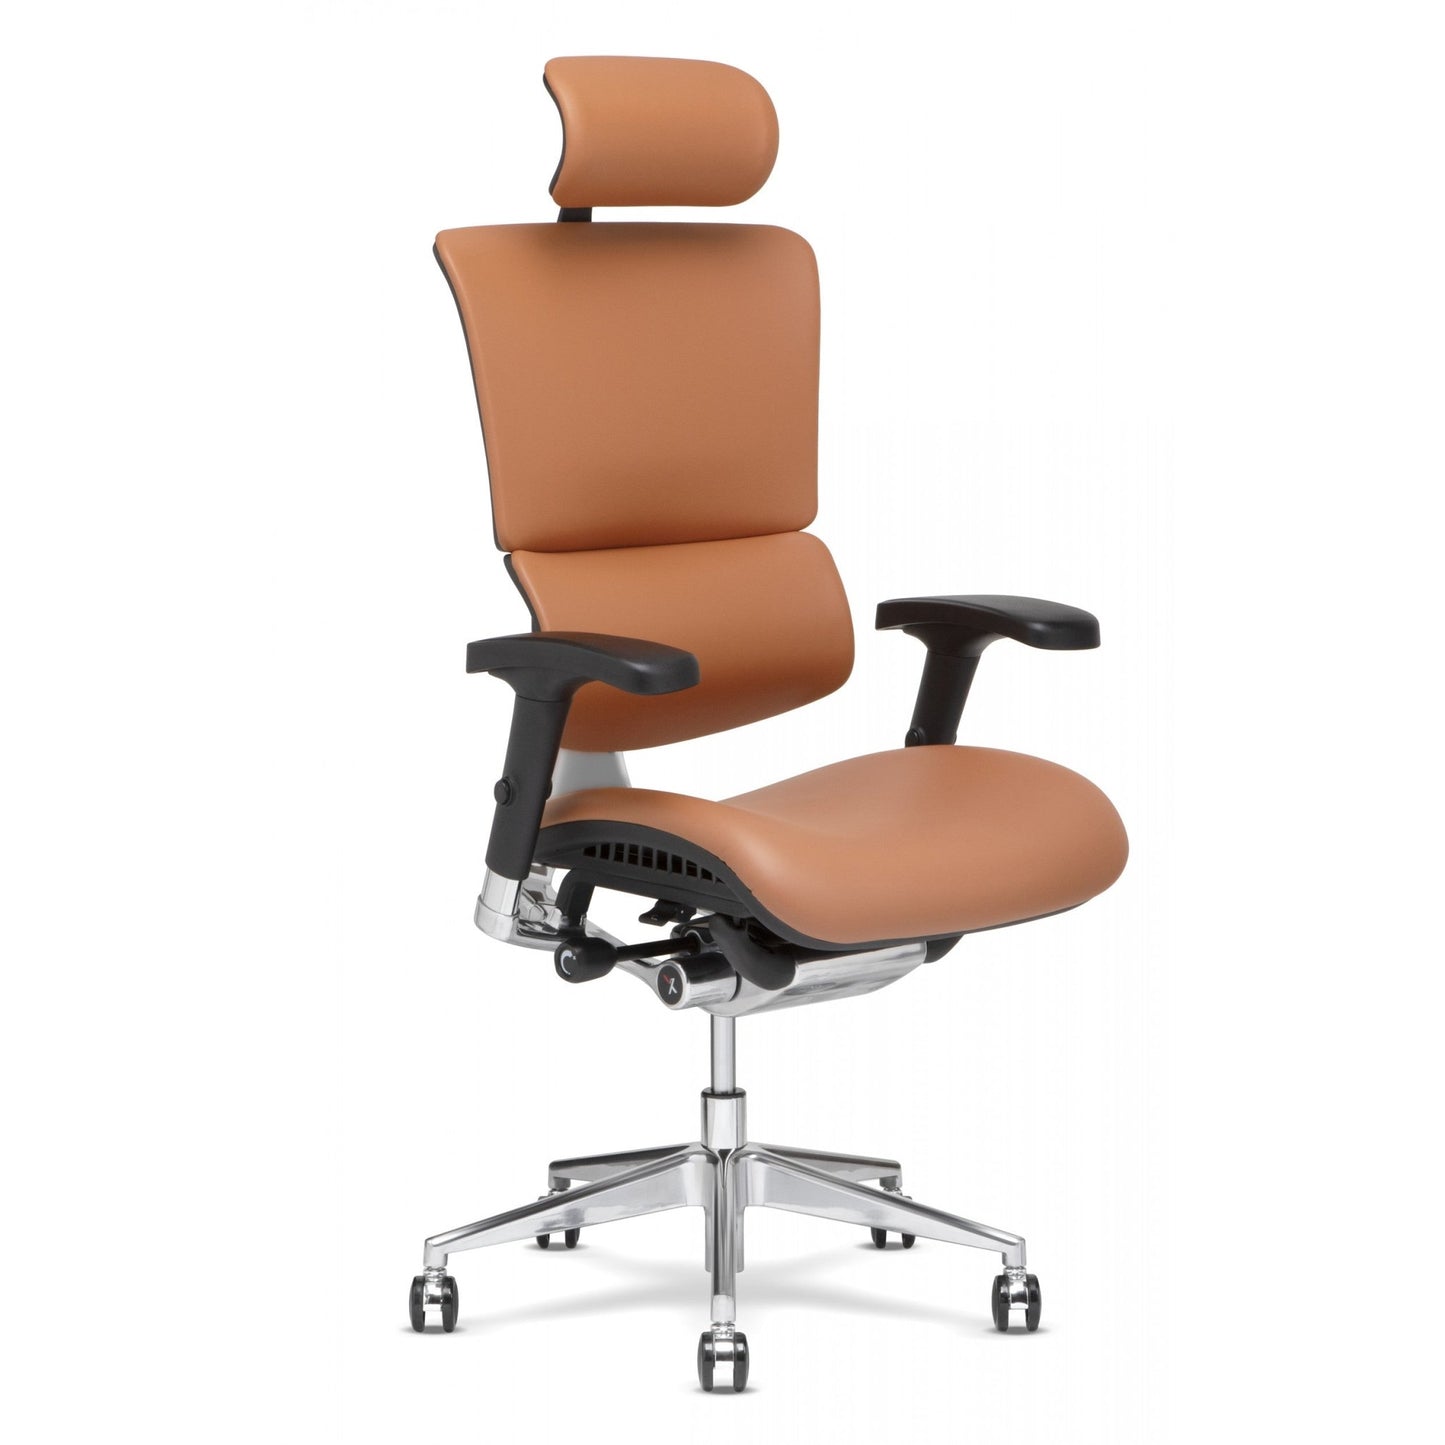 Load image into Gallery viewer, X4 Leather Executive Chair by XChair - Wholesale Office Furniture
